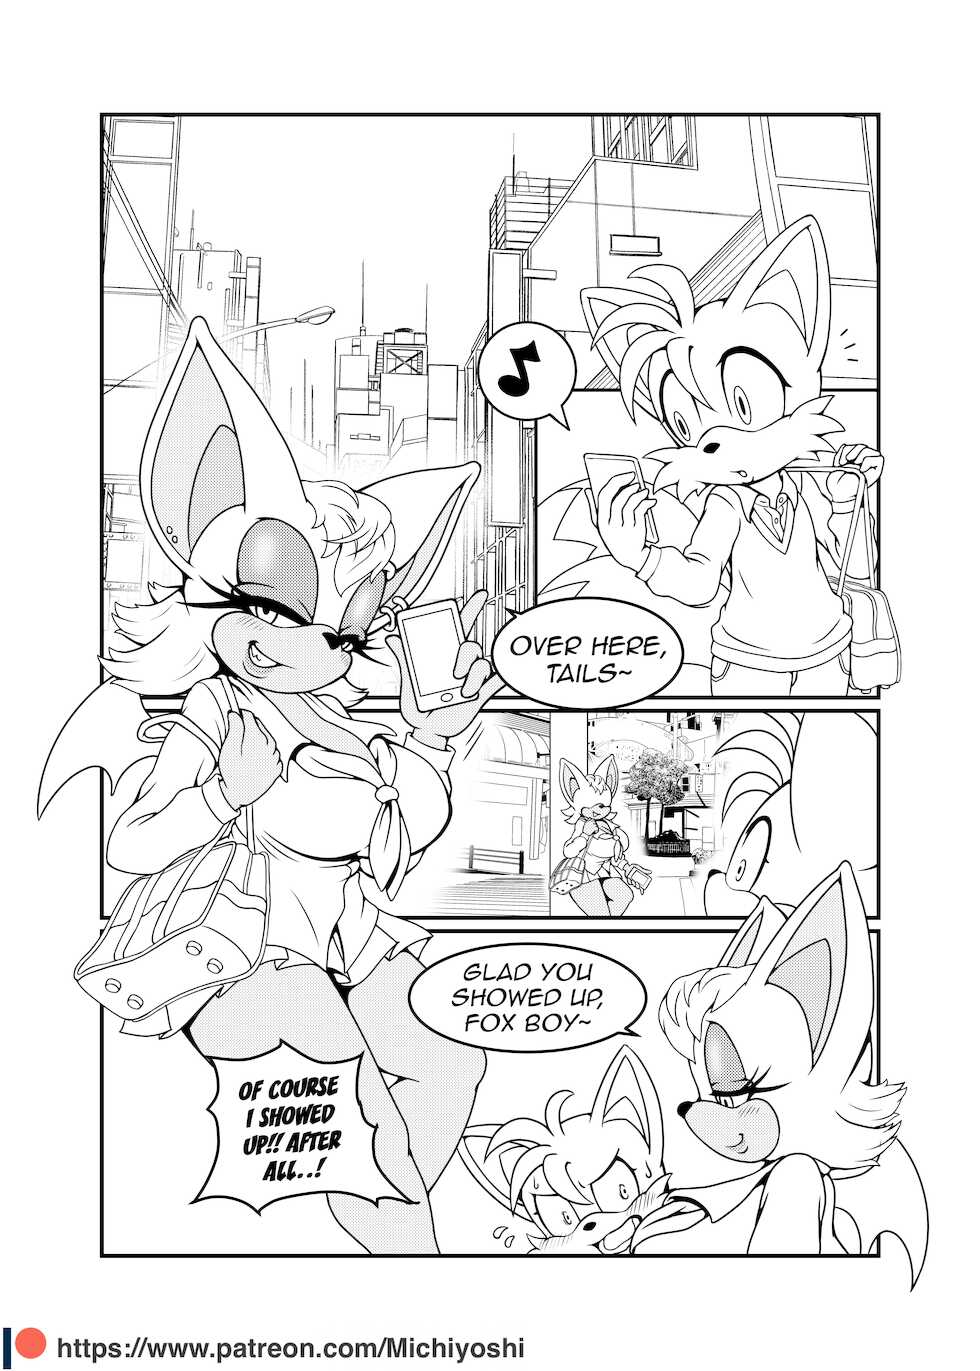 [Michiyoshi] Canned Furry Gaiden 3 (Sonic The Hedgehog) [Revised English] - Page 5